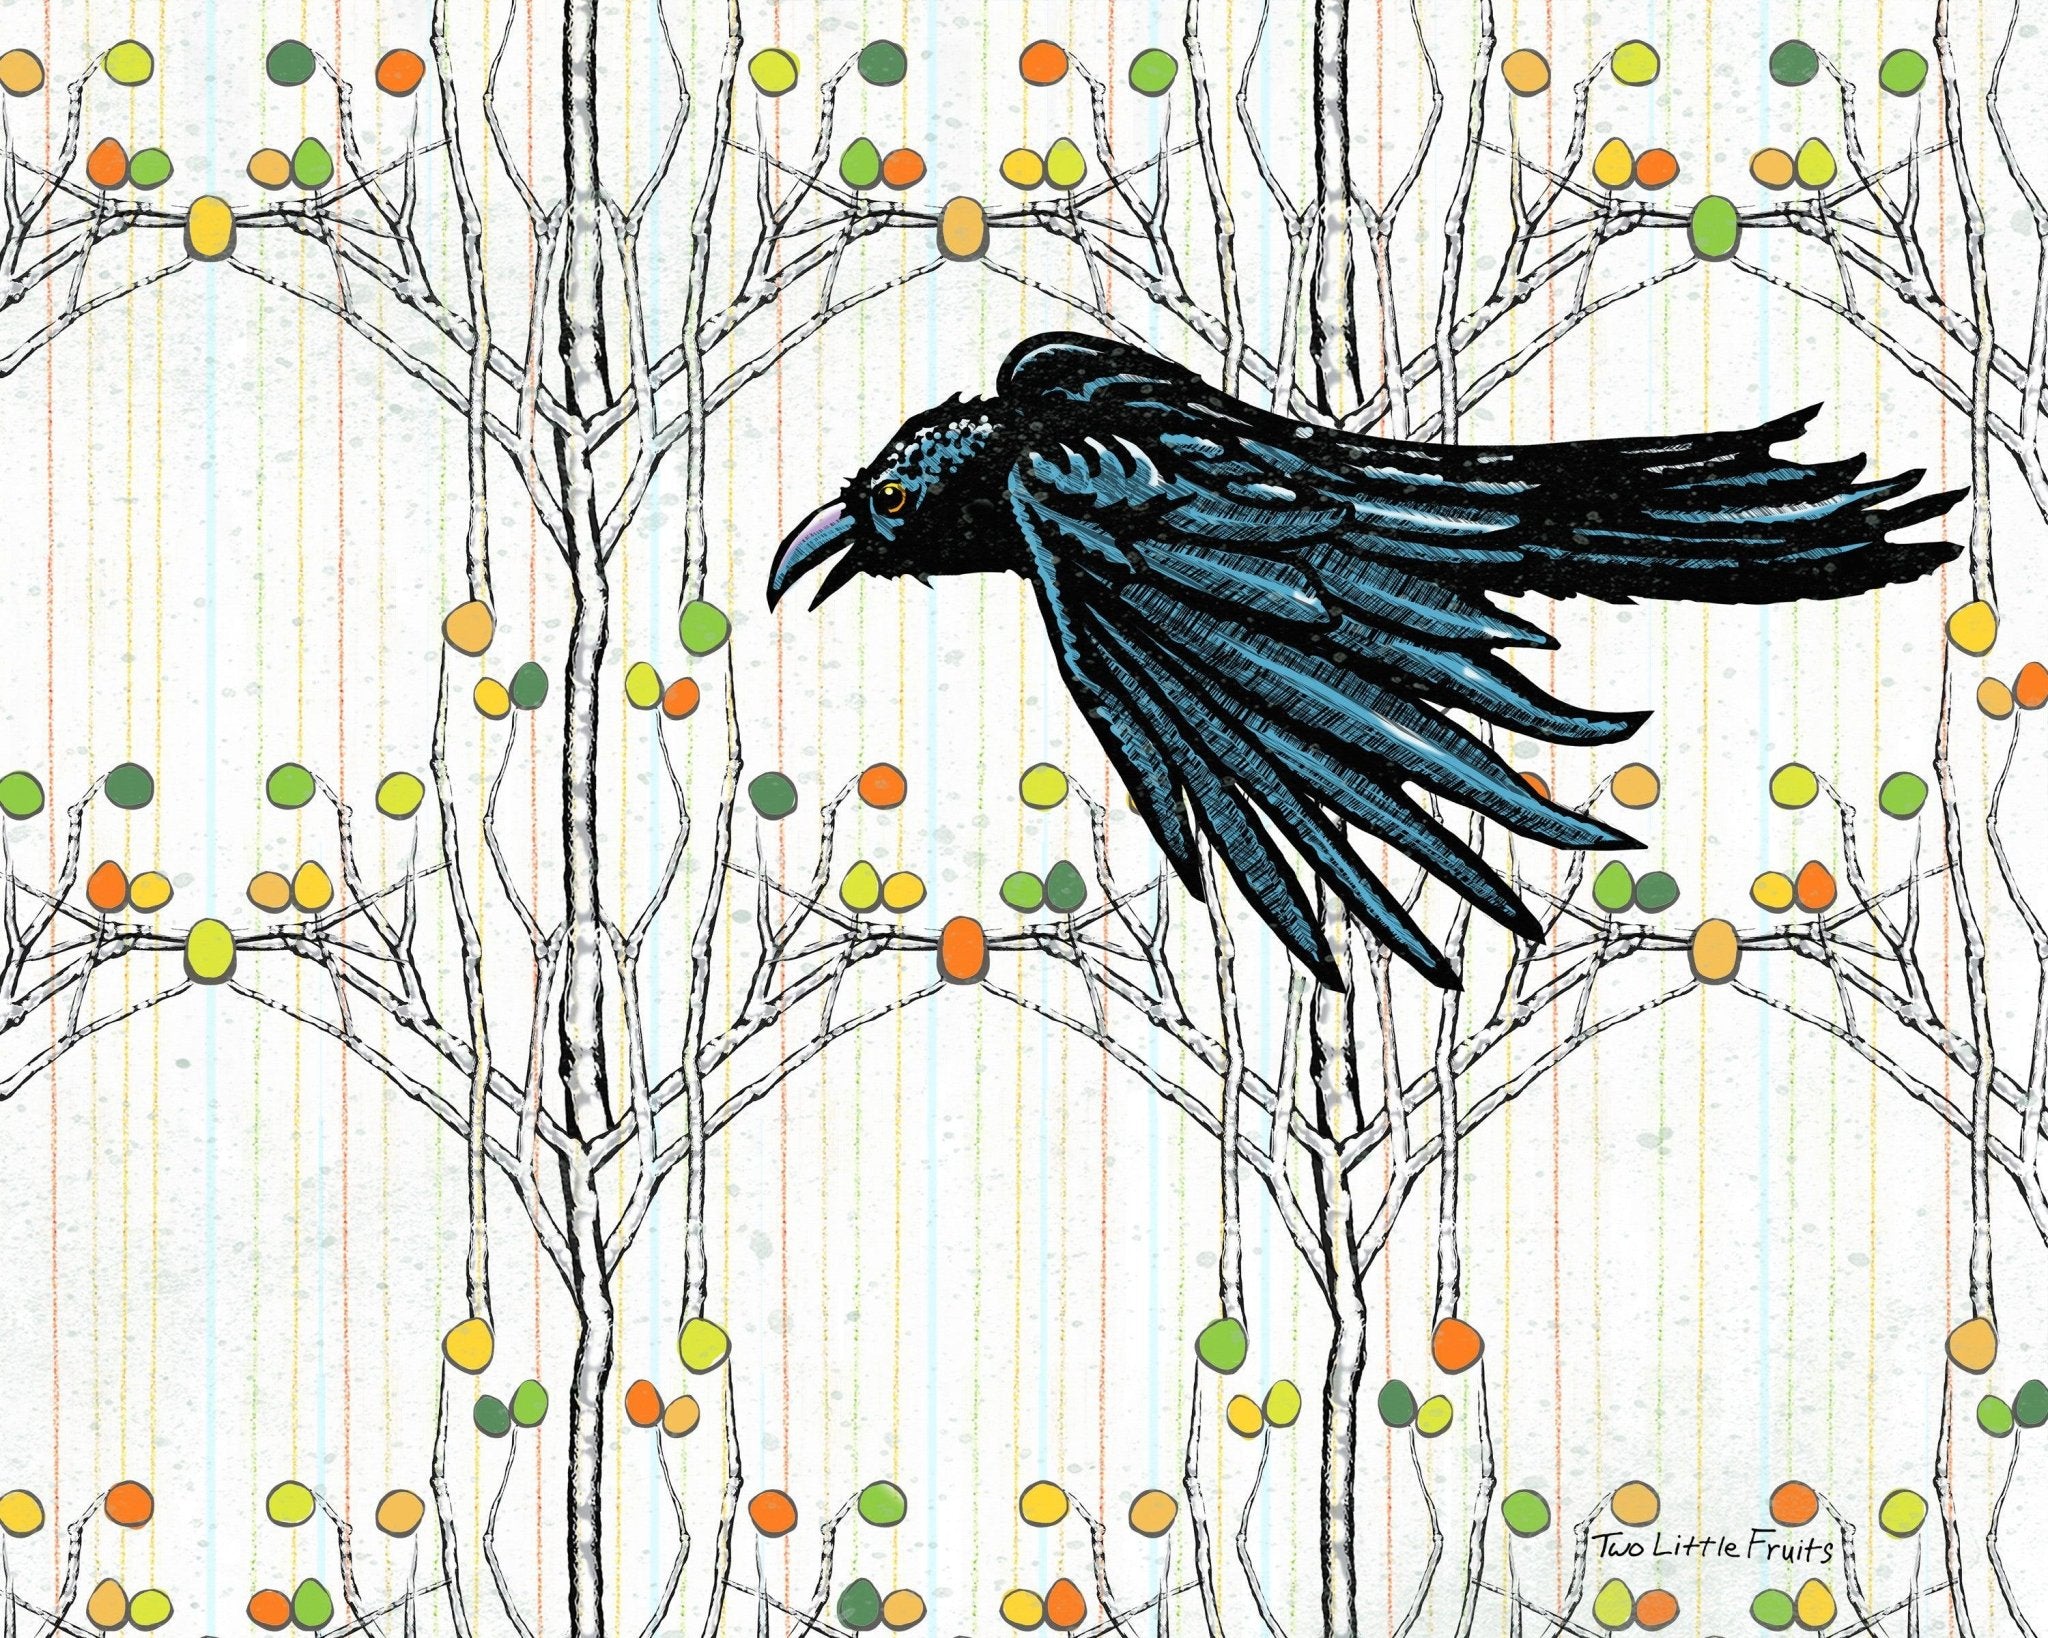 Crow Art Print - Two Little Fruits